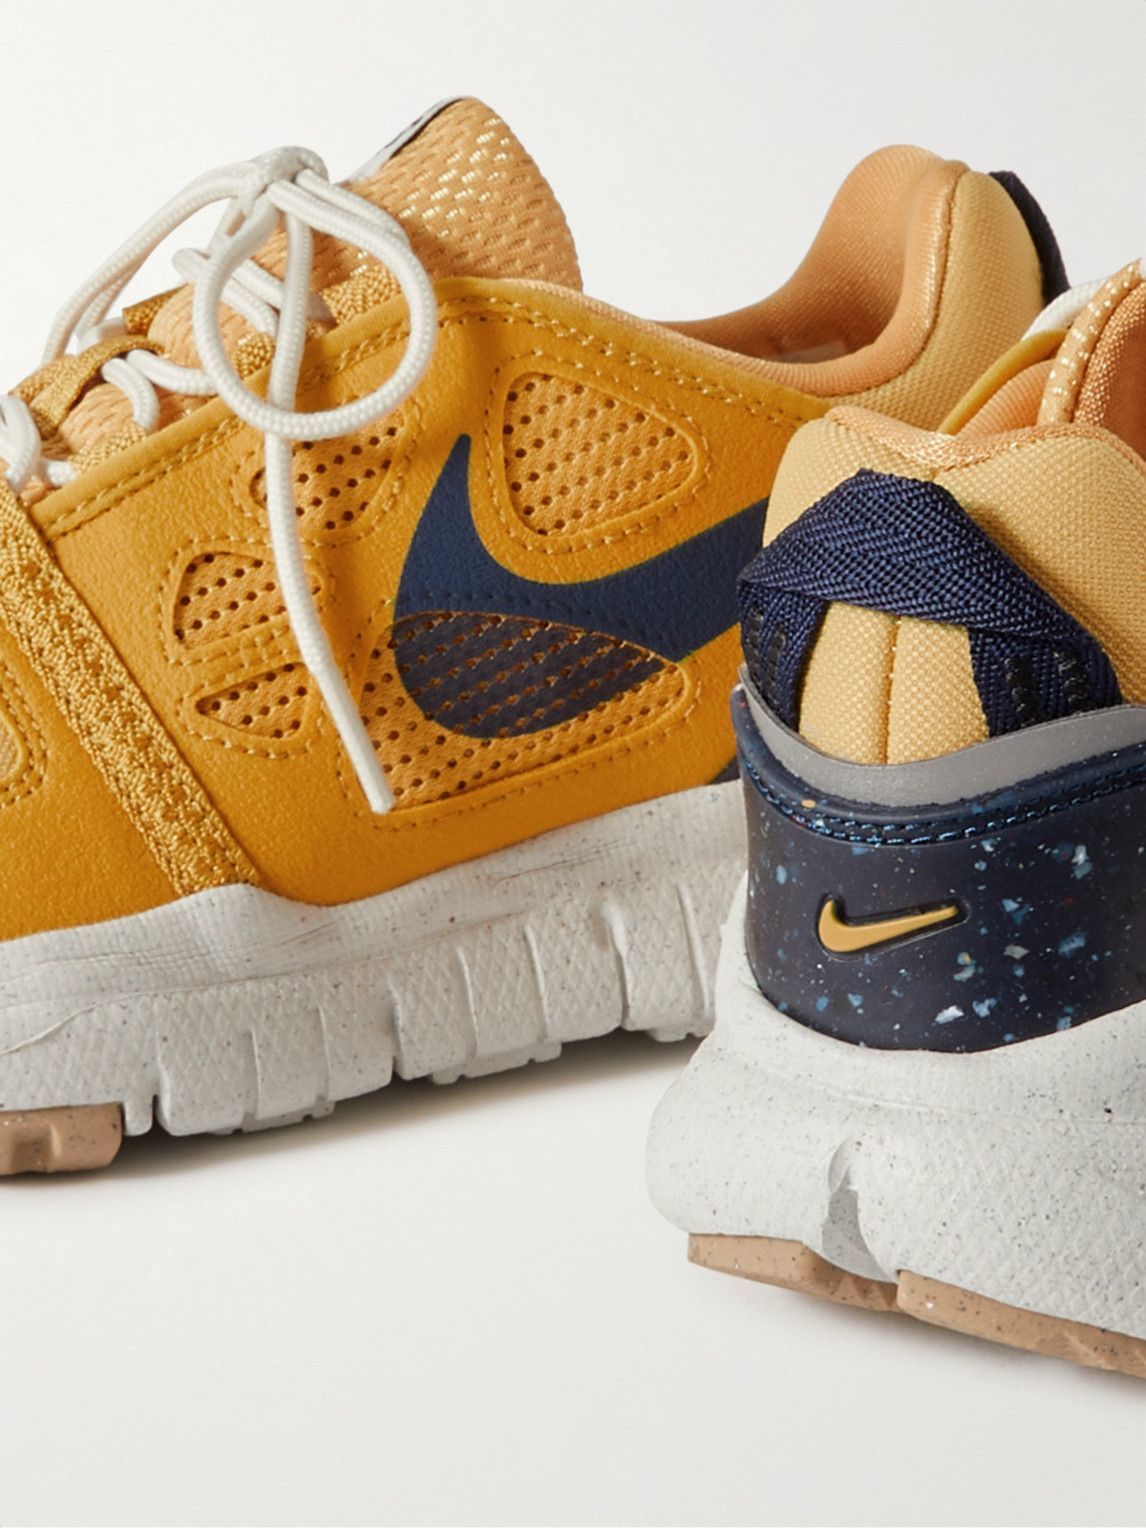 Nike - NWS Free Remastered Leather and Mesh Sneakers - Yellow Nike